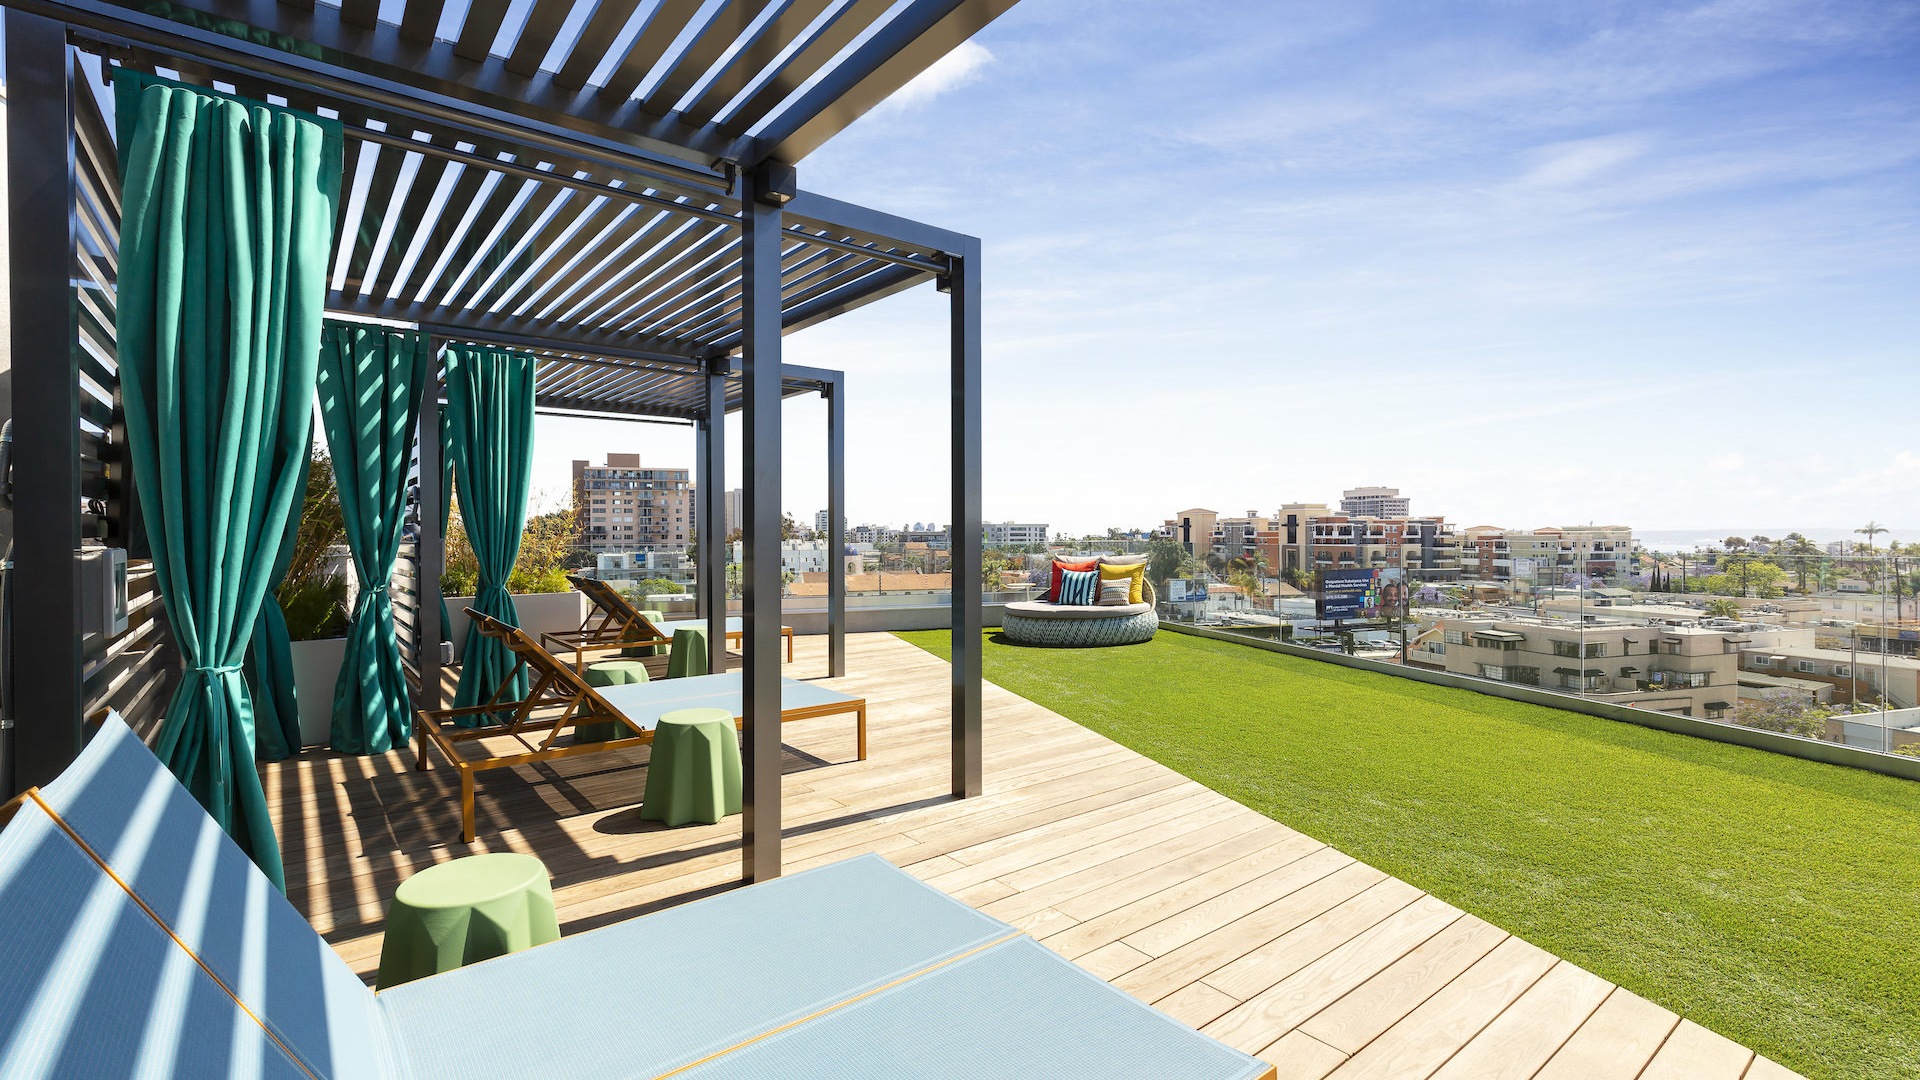 Rooftop deck chaise lounges and event lawn